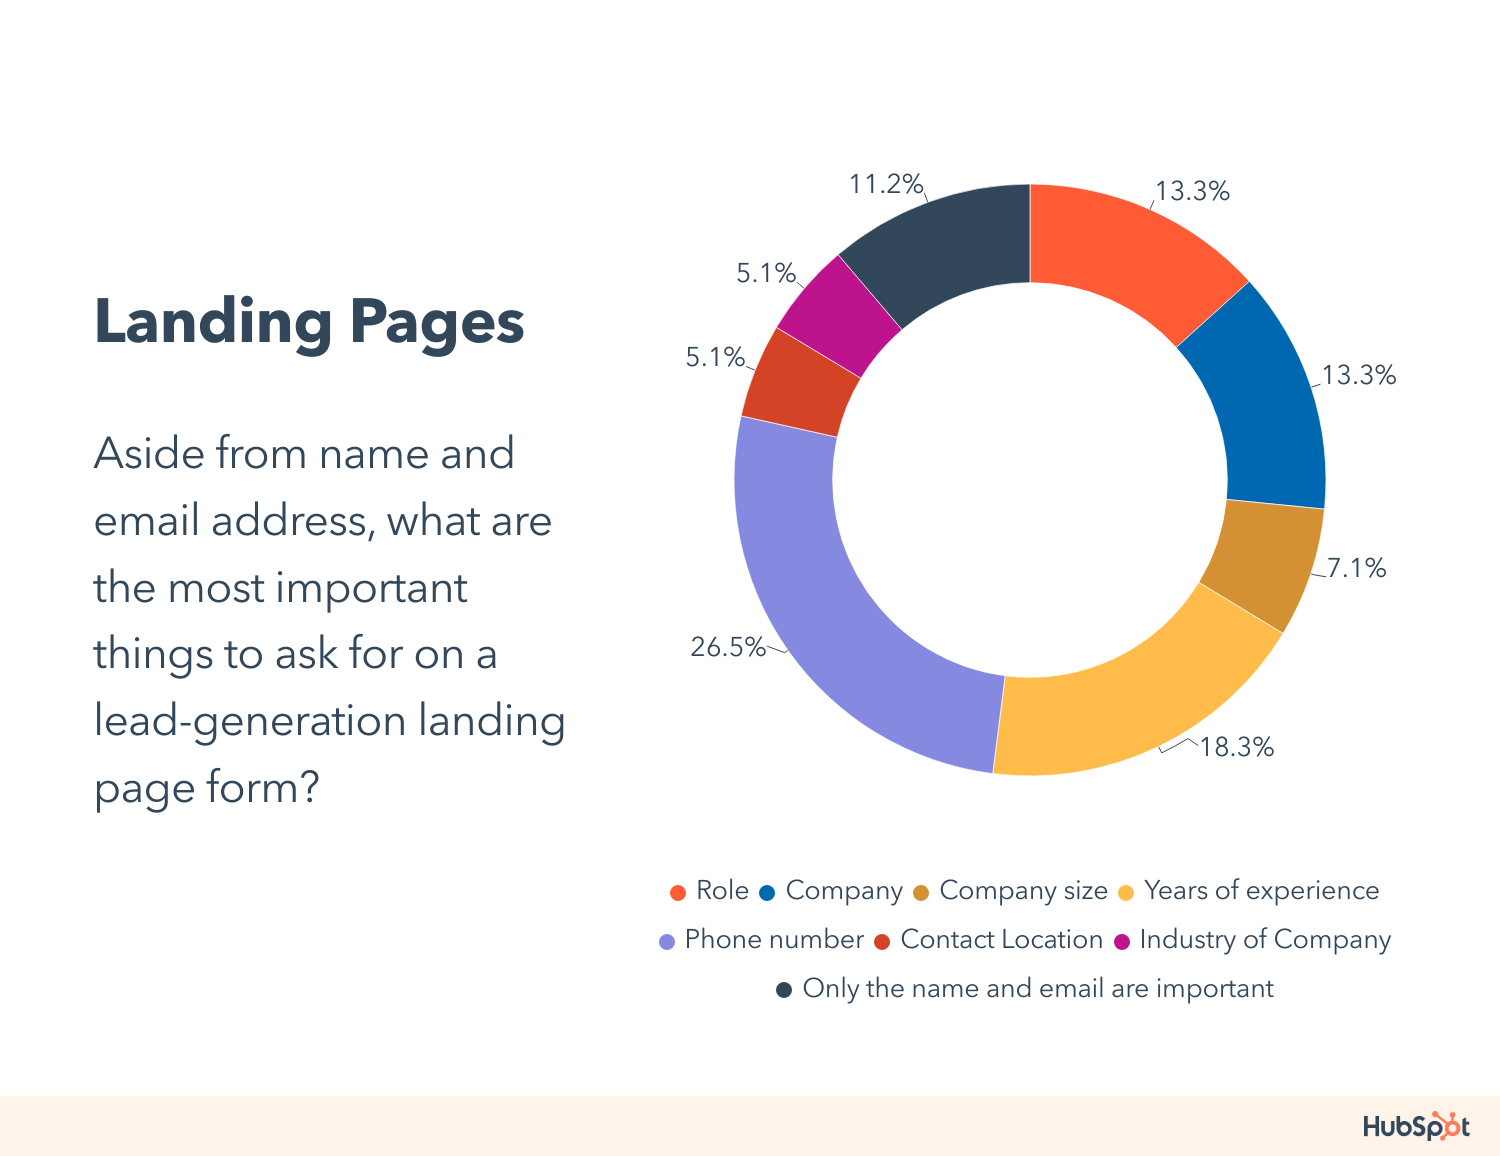 Most essential questions on a landing page form